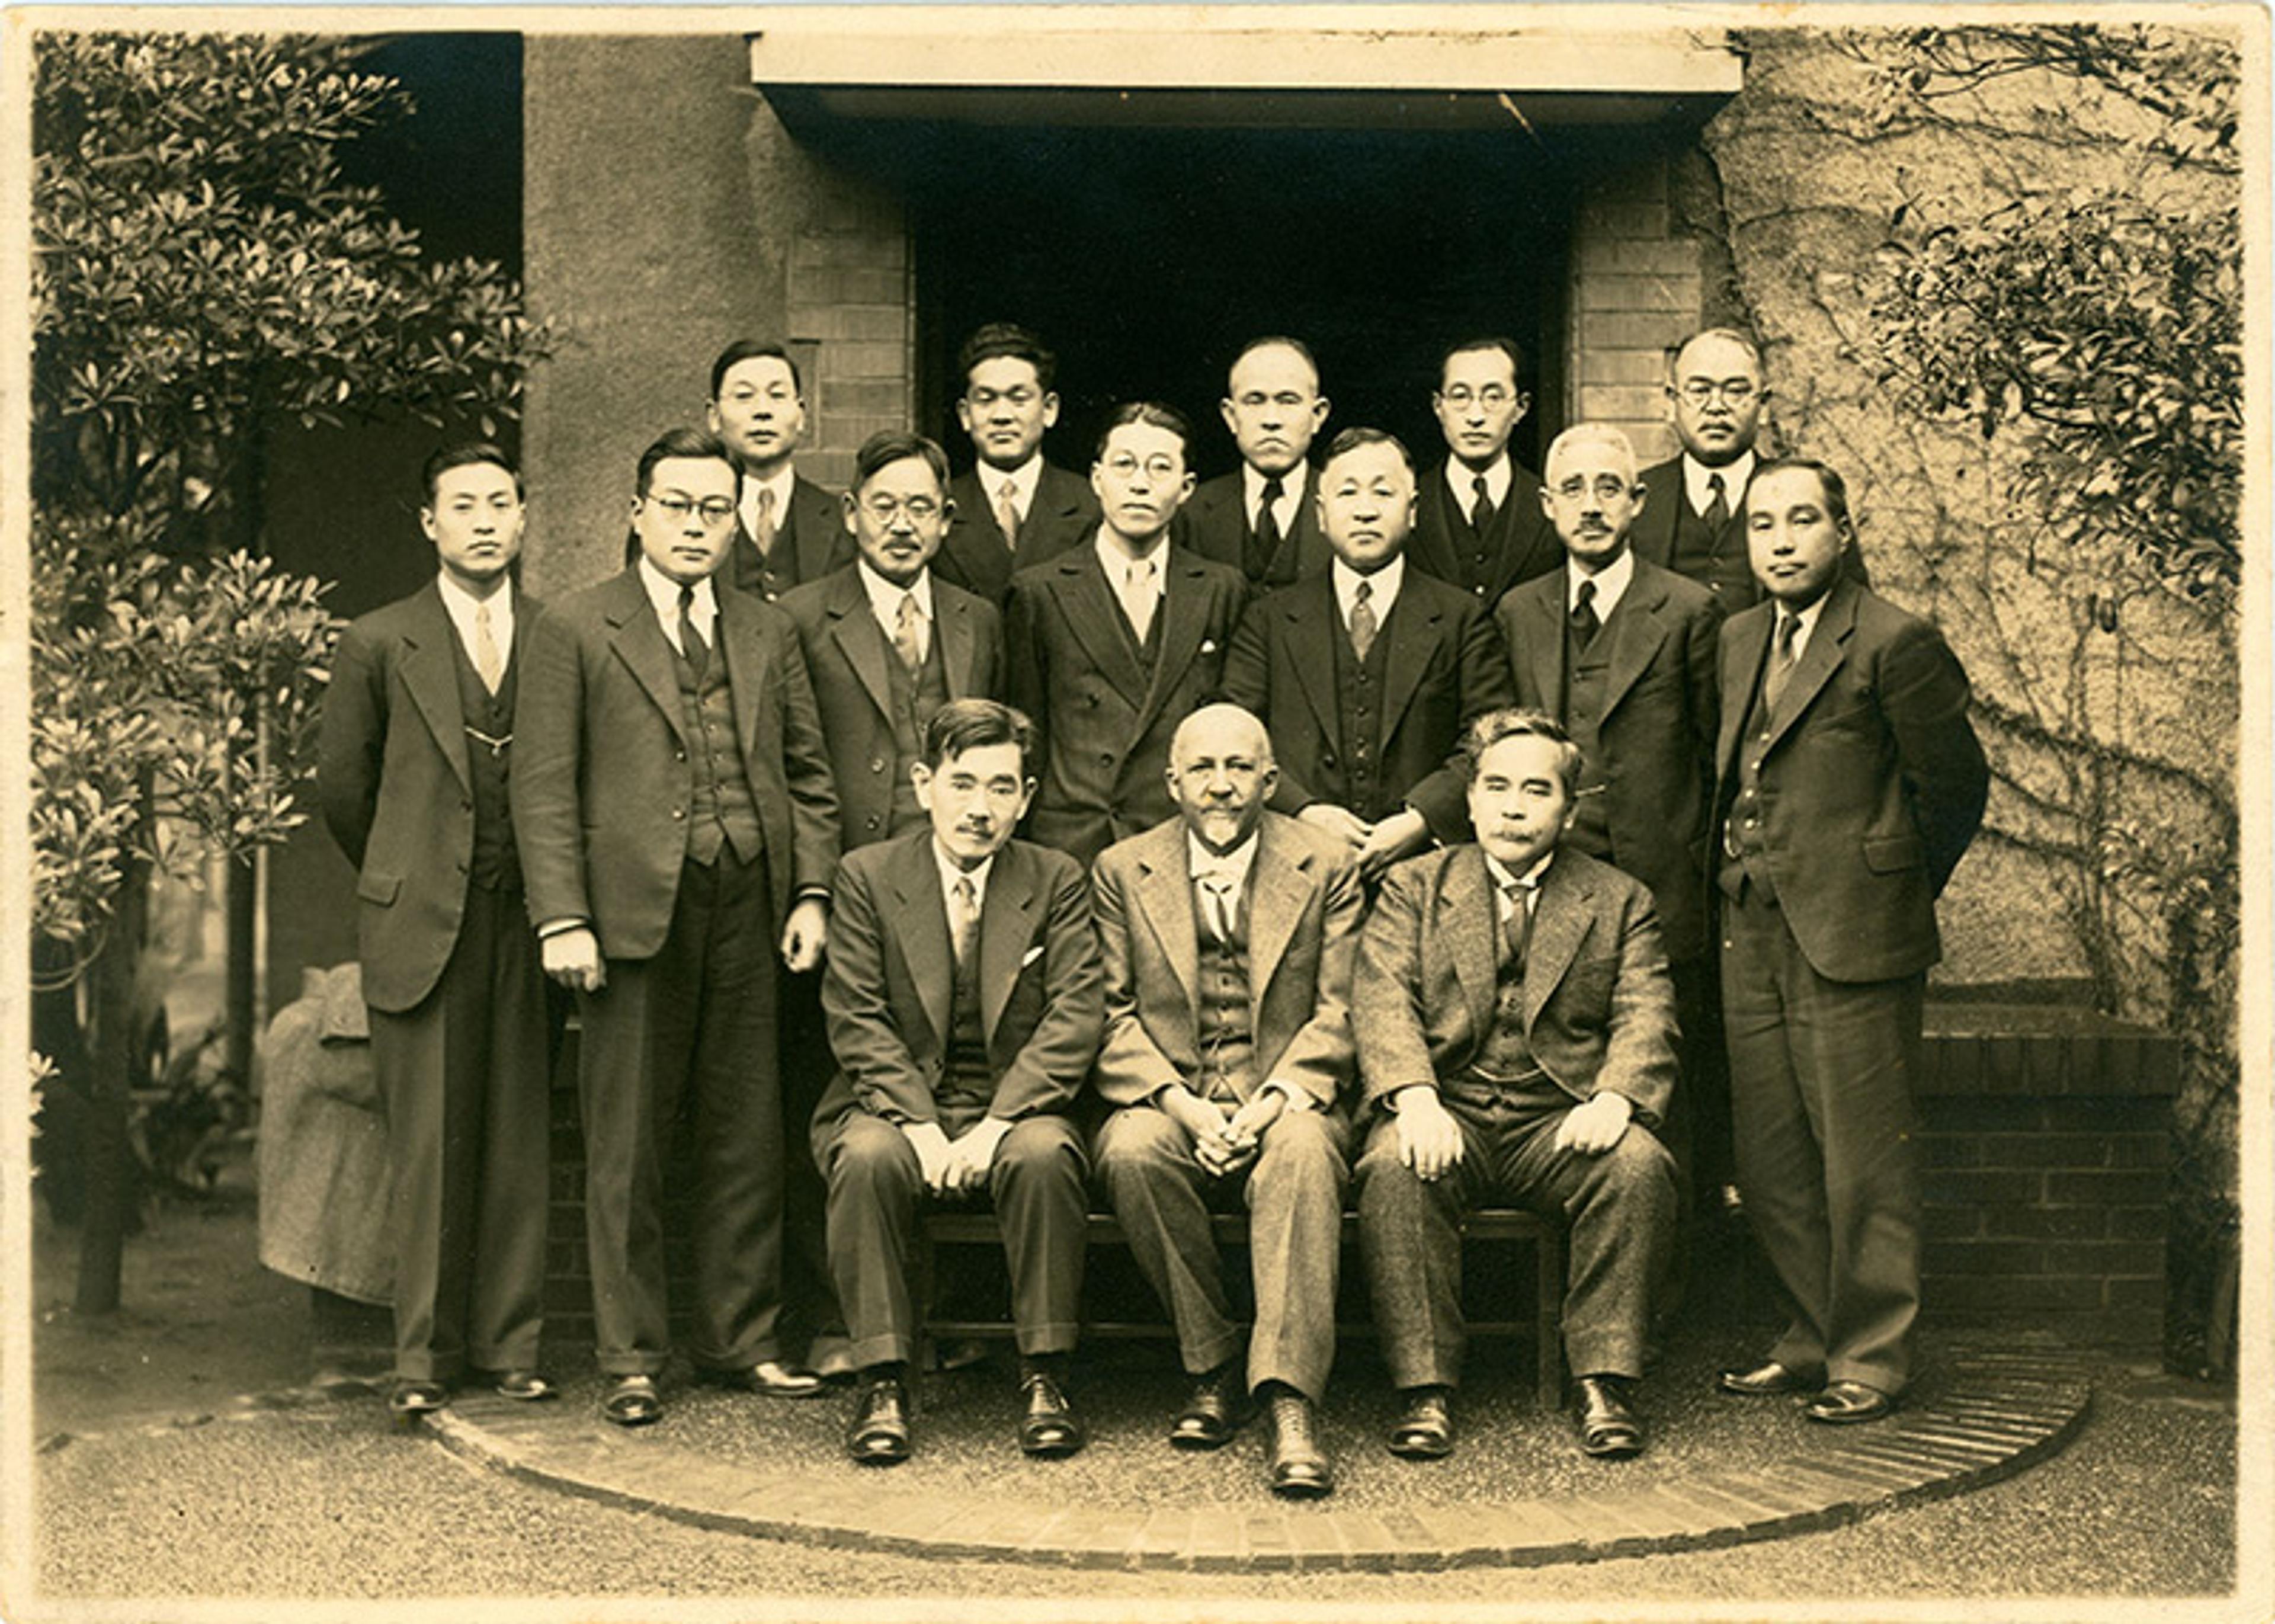 A sepia photograph of a group of professors arranged in a formal pose.